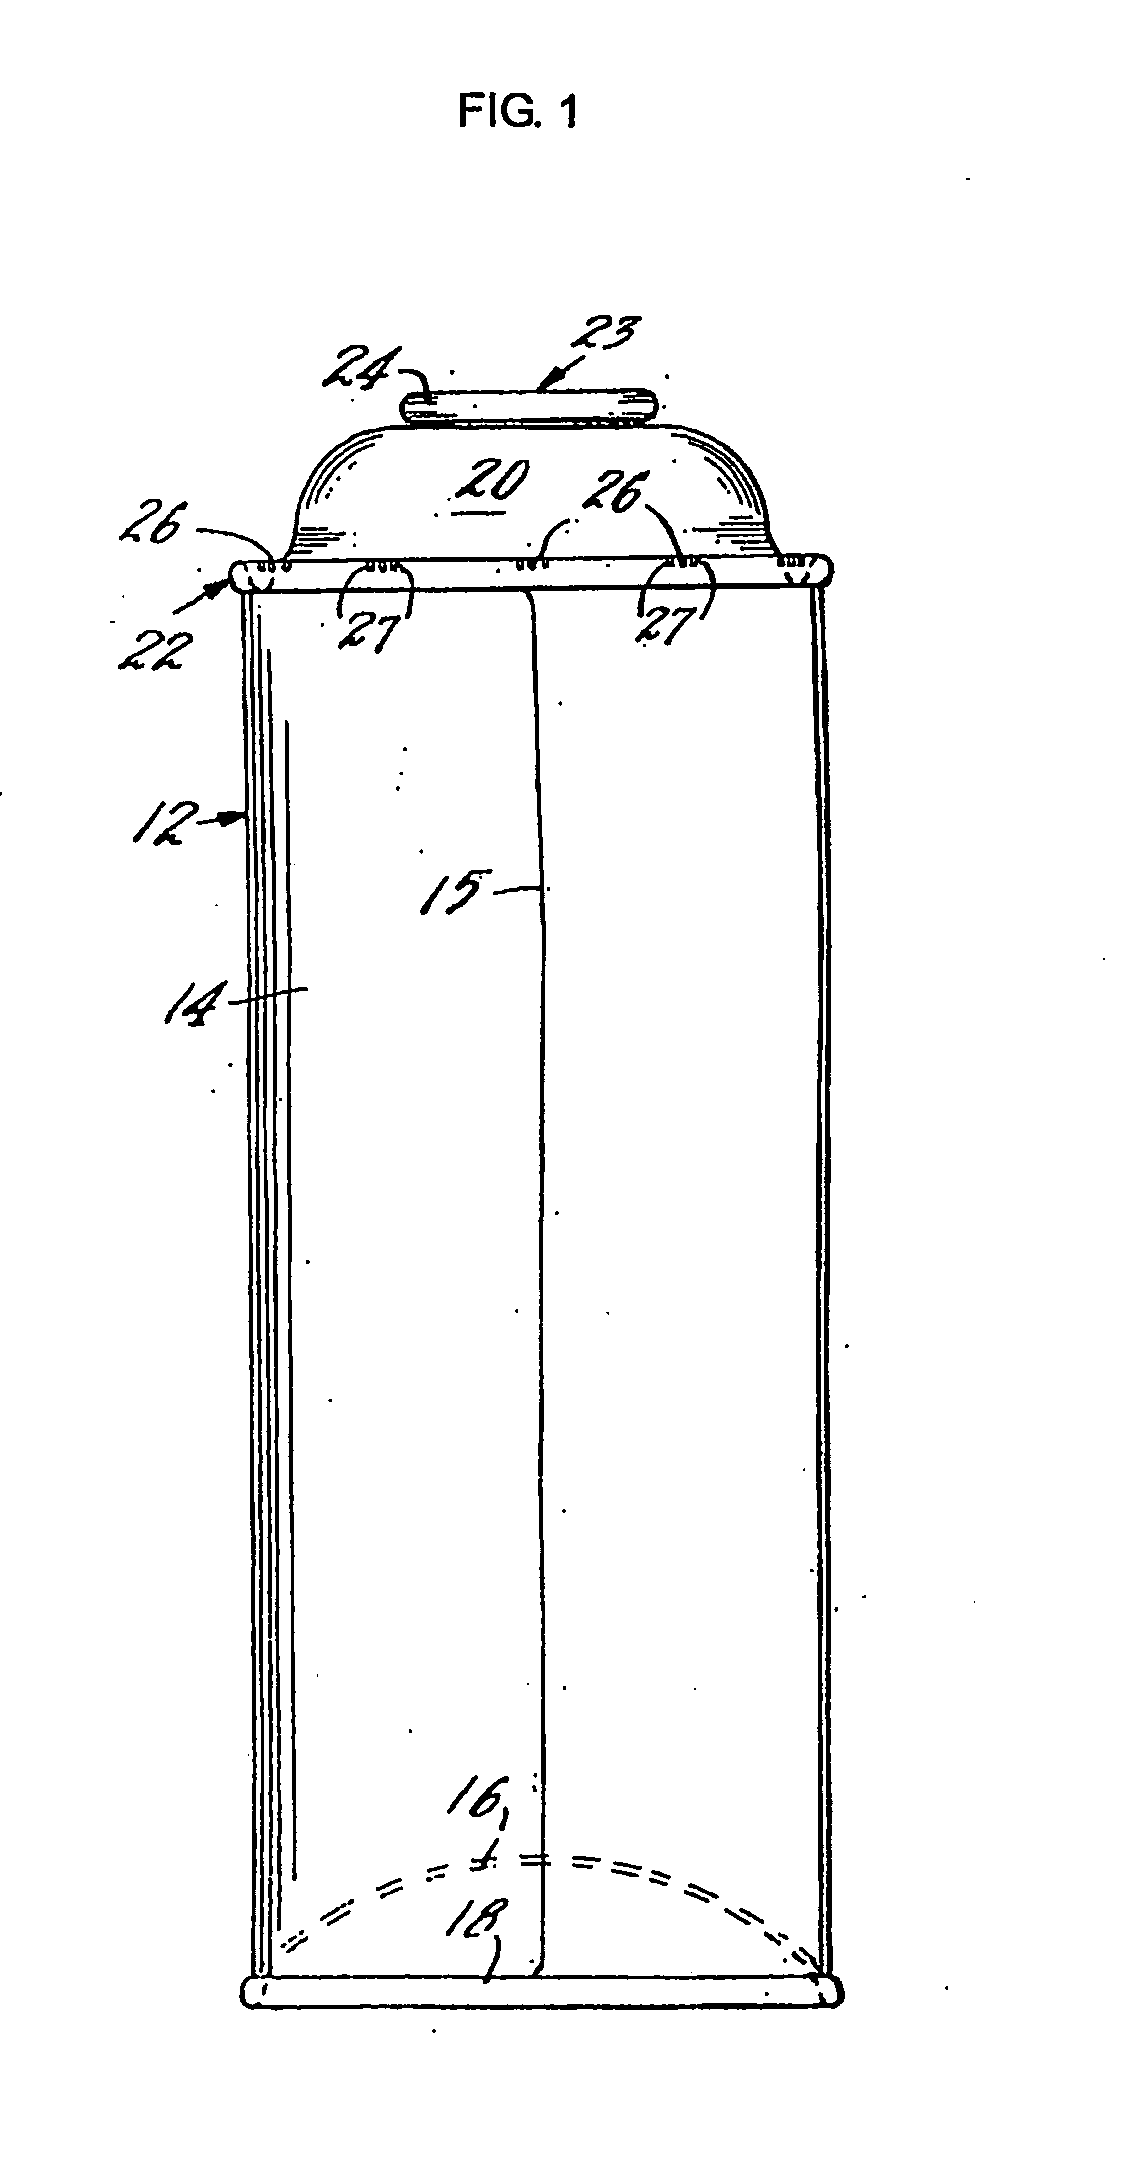 Small Sized and High-Pressurized Container for Preventing Explosion